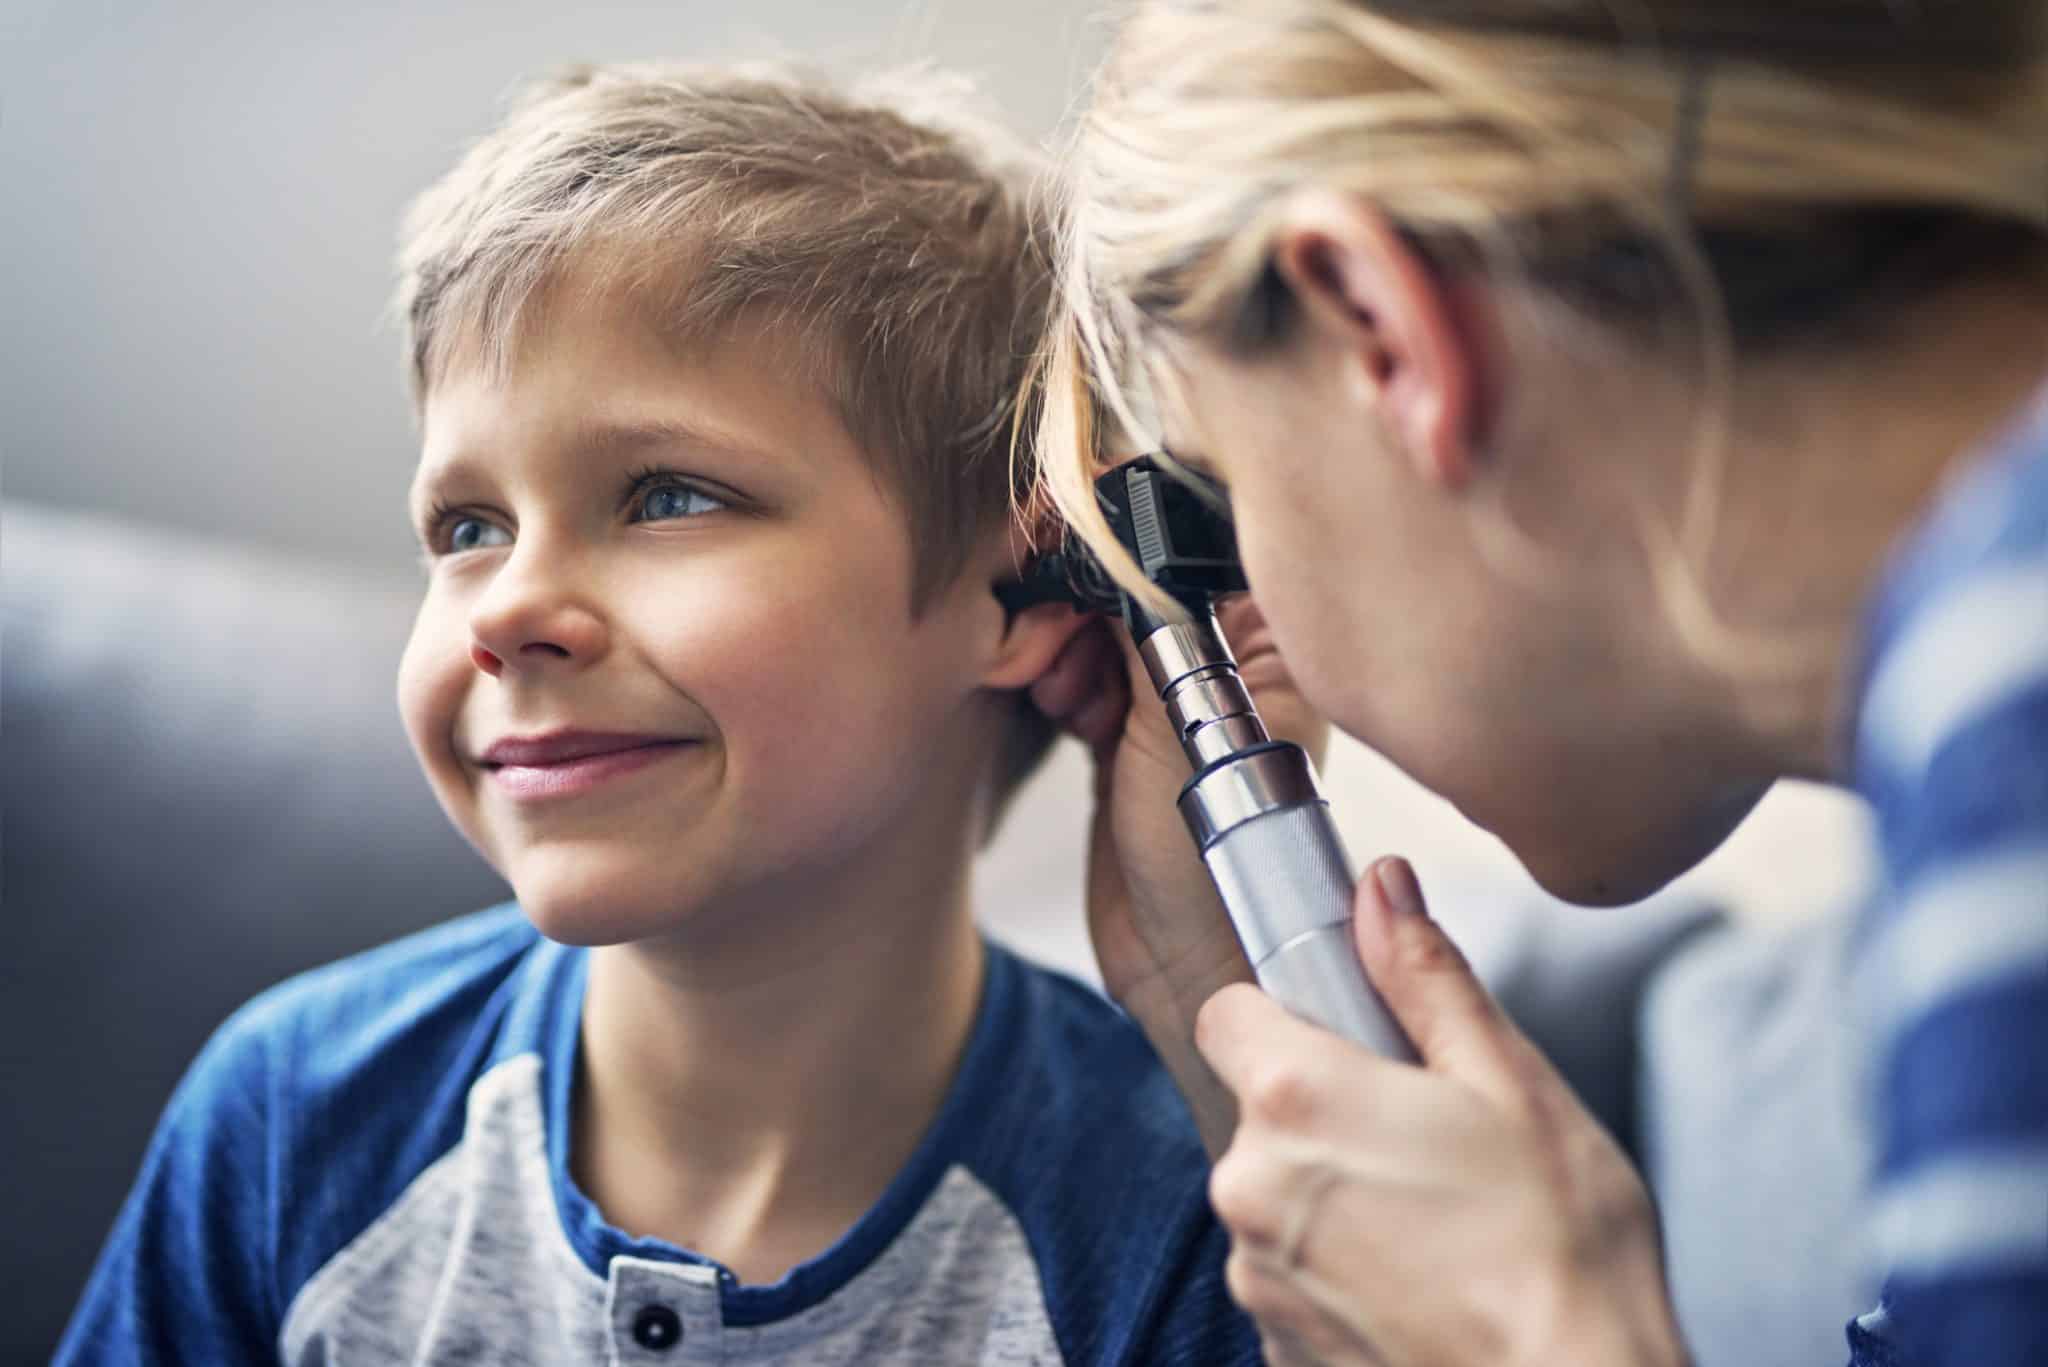 Young boy smiling while getting his ears examined during a pediatric appointment.